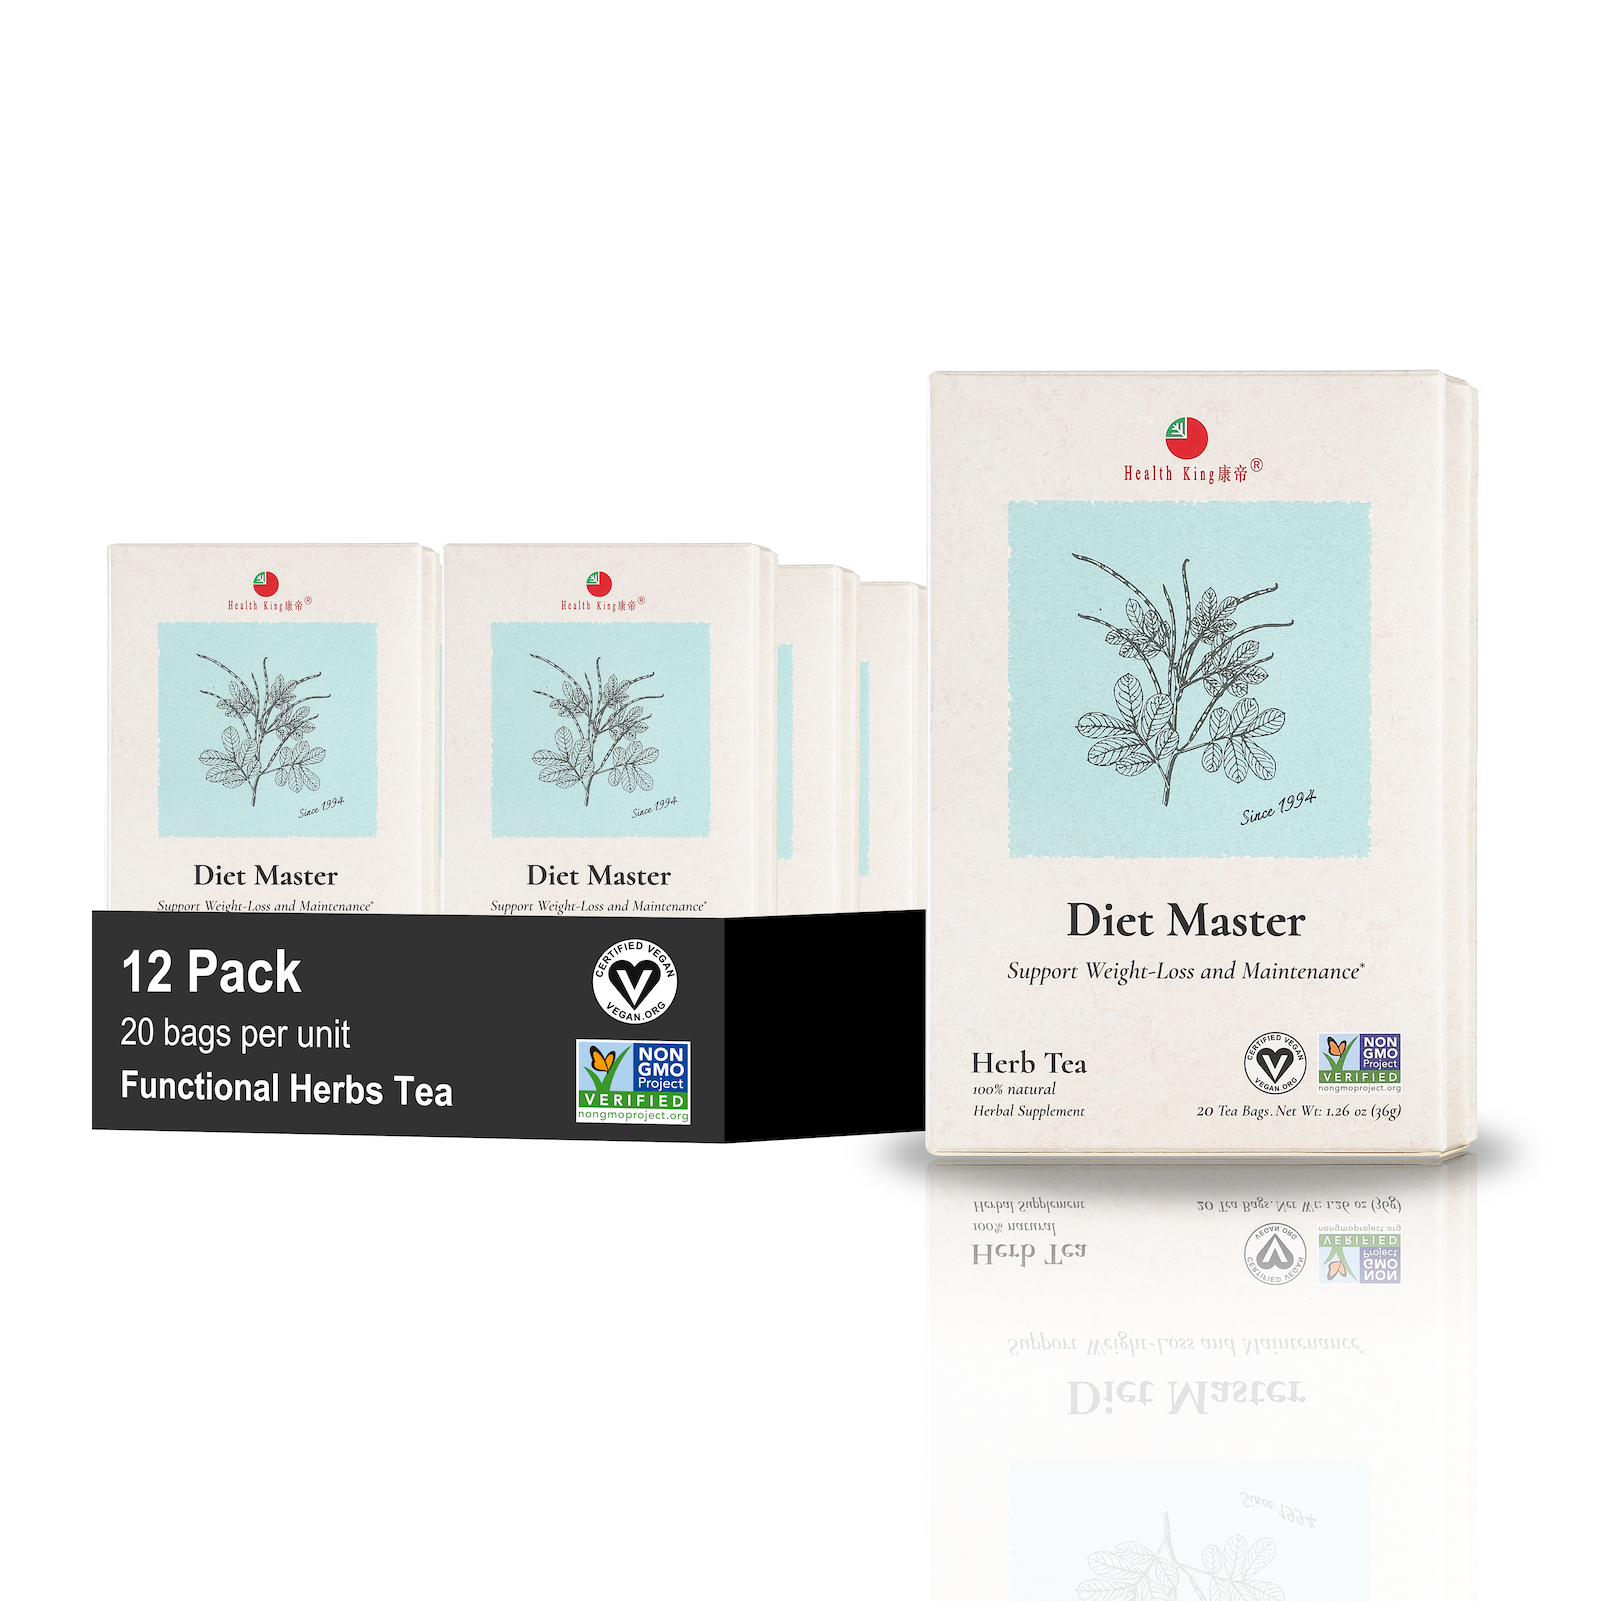 Twelve-pack of Diet Master Herb Tea for healthy weight management